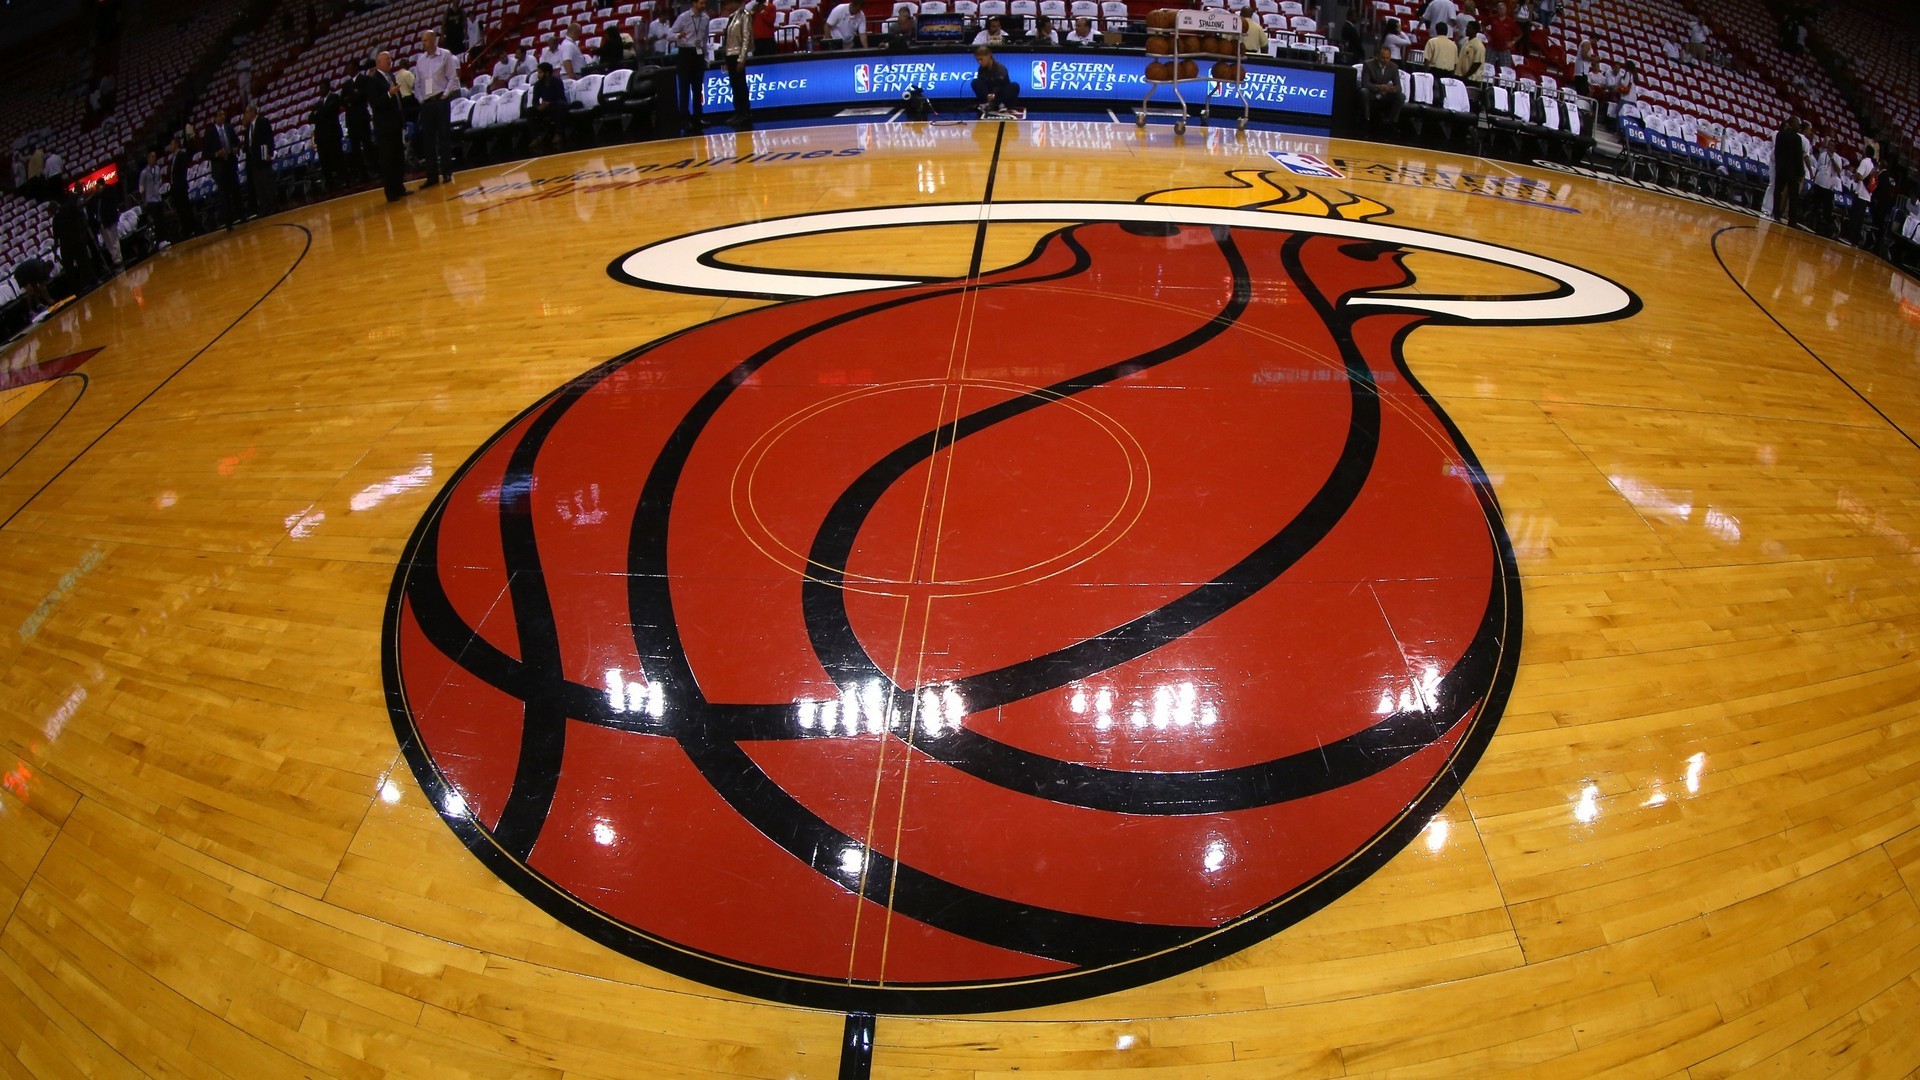 1920x1080 Miami Heat Wallpaper For Mac Backgrounds with high-resolution   pixel. You can use